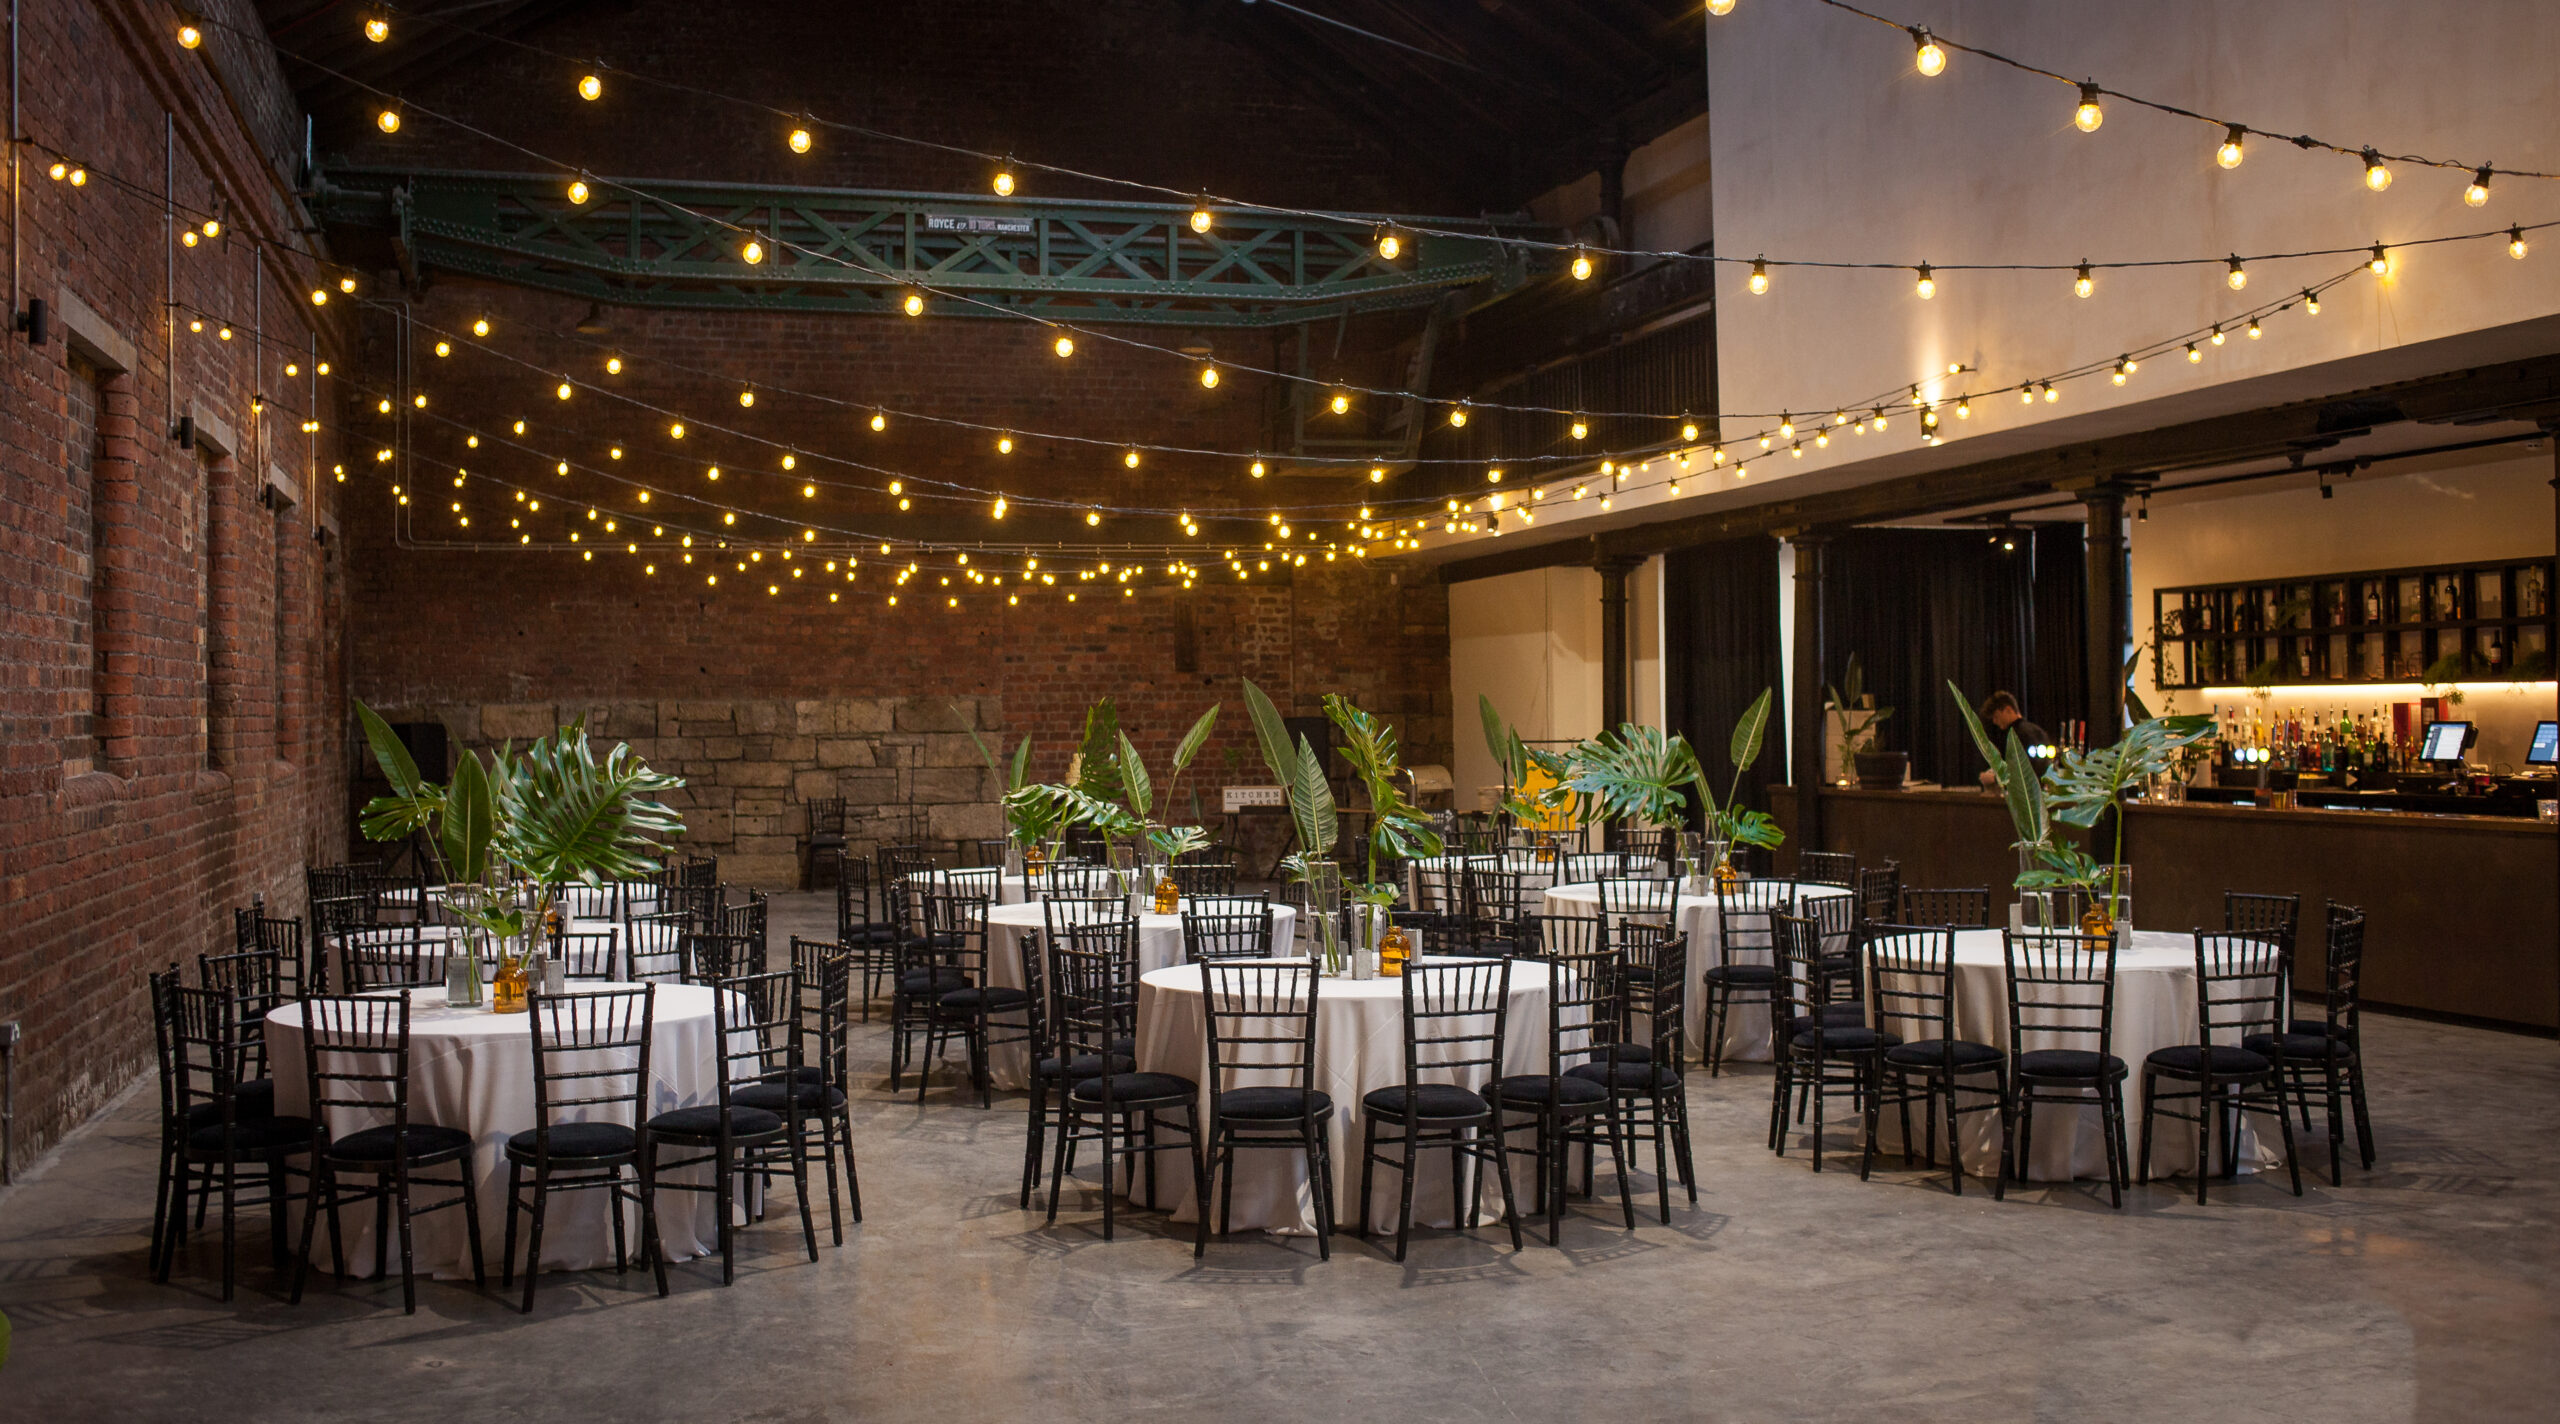 A vintage wedding setup at The Engine Works with an industrial charm.